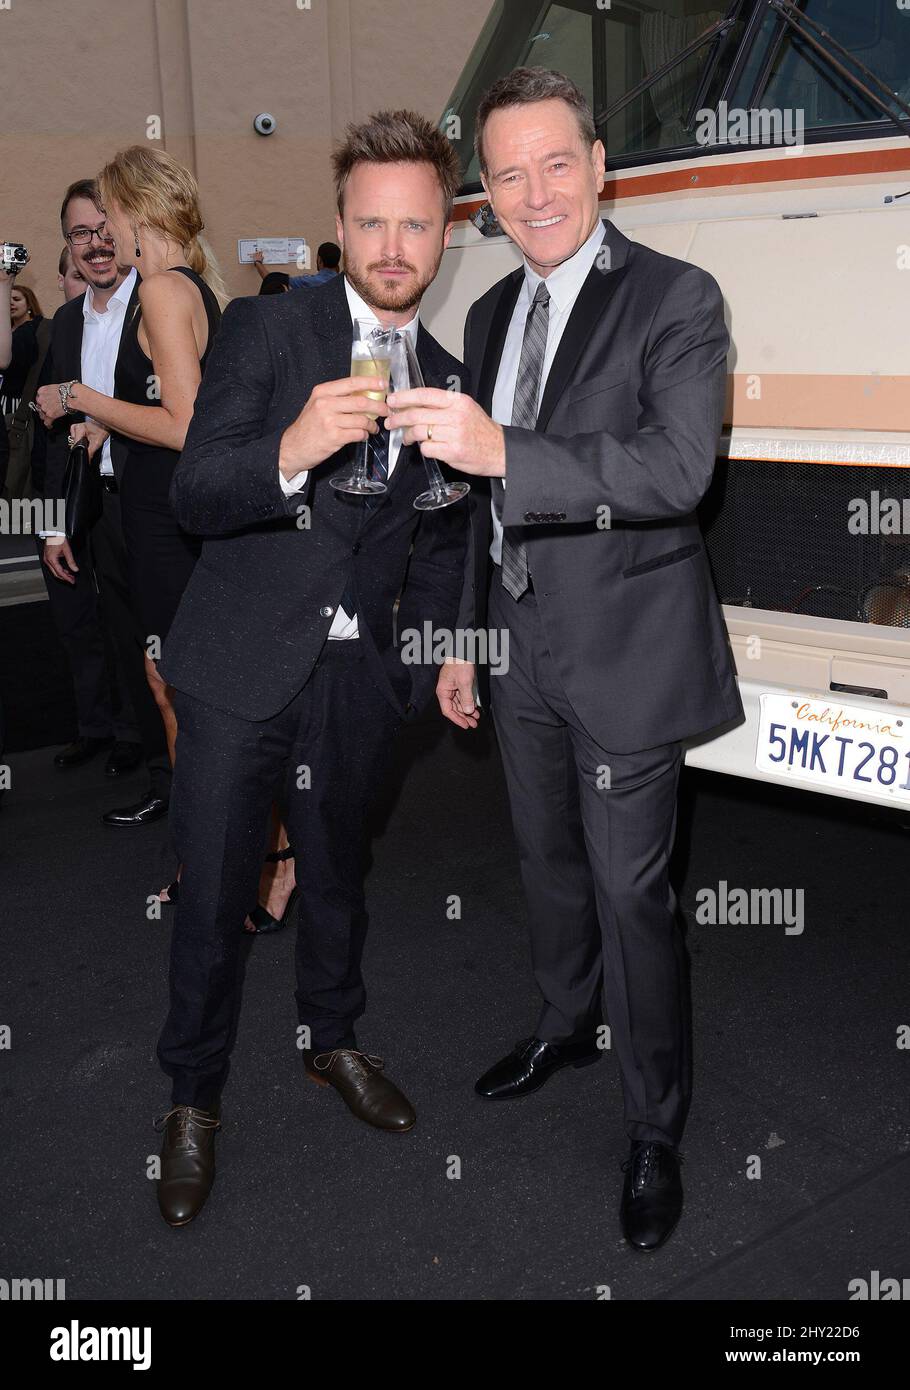 Aaron Paul and Bryan Cranston arriving for the premiere of Breaking Bad held at Sony Pictures Studios in Culver City, Los Angeles. Stock Photo